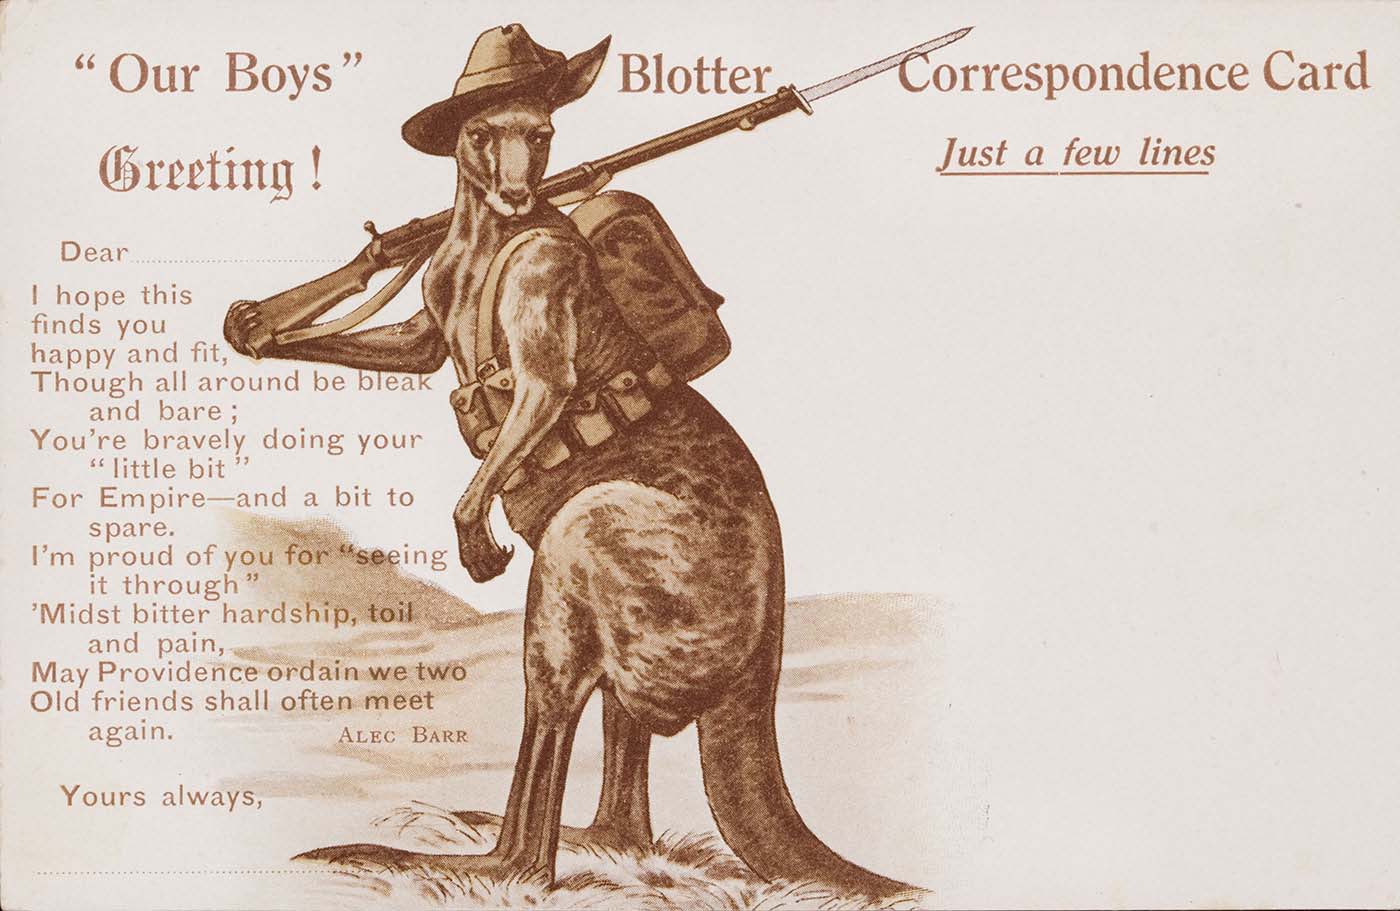 Postcard with a central illustration of a brown-coloured kangaroo wearing an Australian army hat and backpack, balancing a rifle with bayonet over one shoulder. '"Our Boys", Greeting! Blotter, Correspondence Card, Just a few lines' is written at the top. The postcard includes a verse attributed to 'Alec Barr'. - click to view larger image